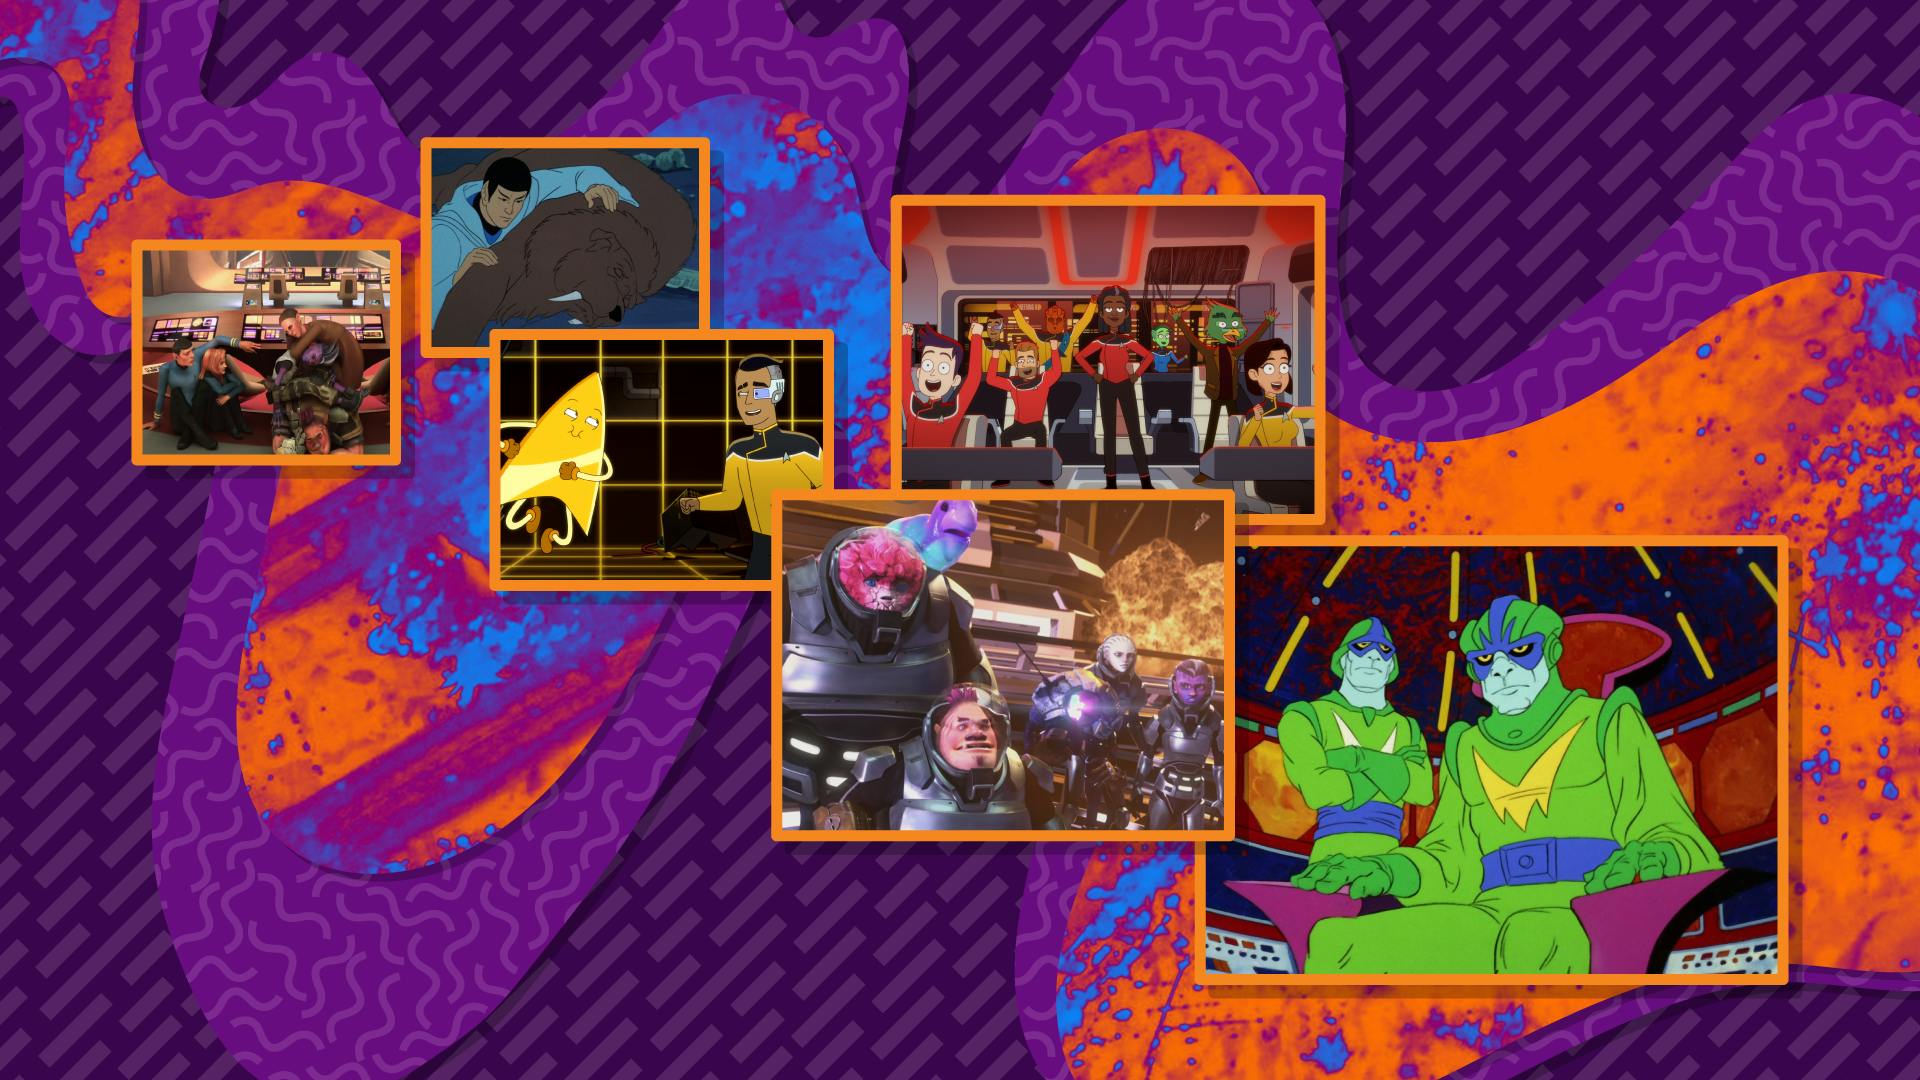 Illustrated banner featuring episodic stills across Star Trek's animated series like The Animated Series, Lower Decks, and Prodigy